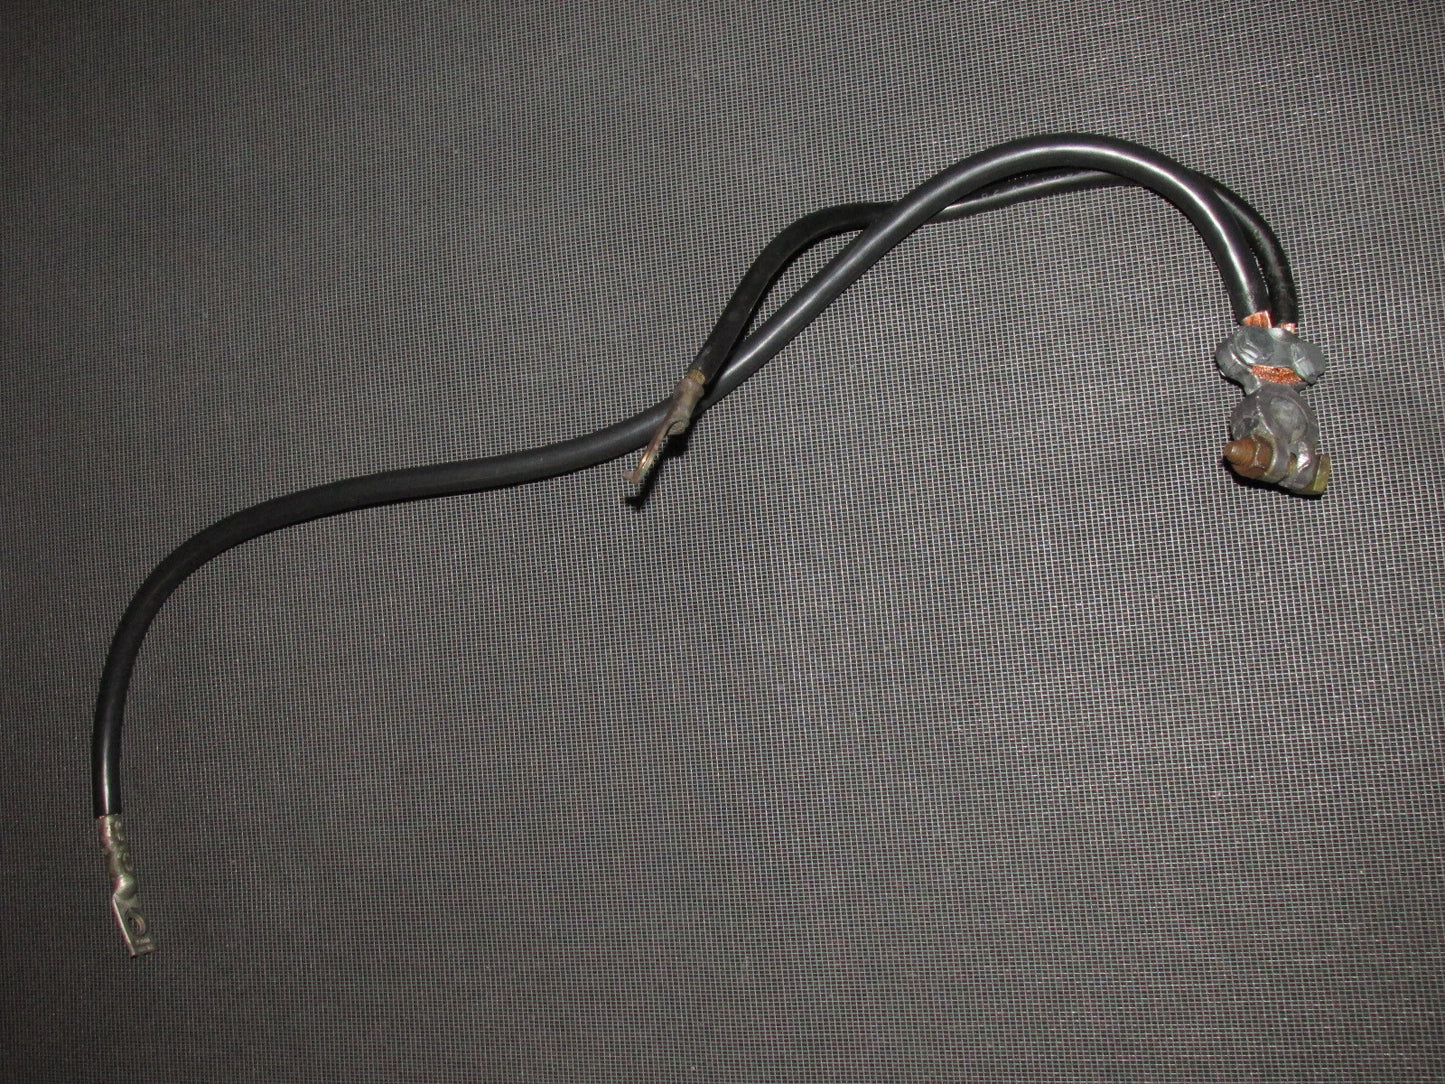 01 02 03 Acura CL OEM Battery Cable - Negative